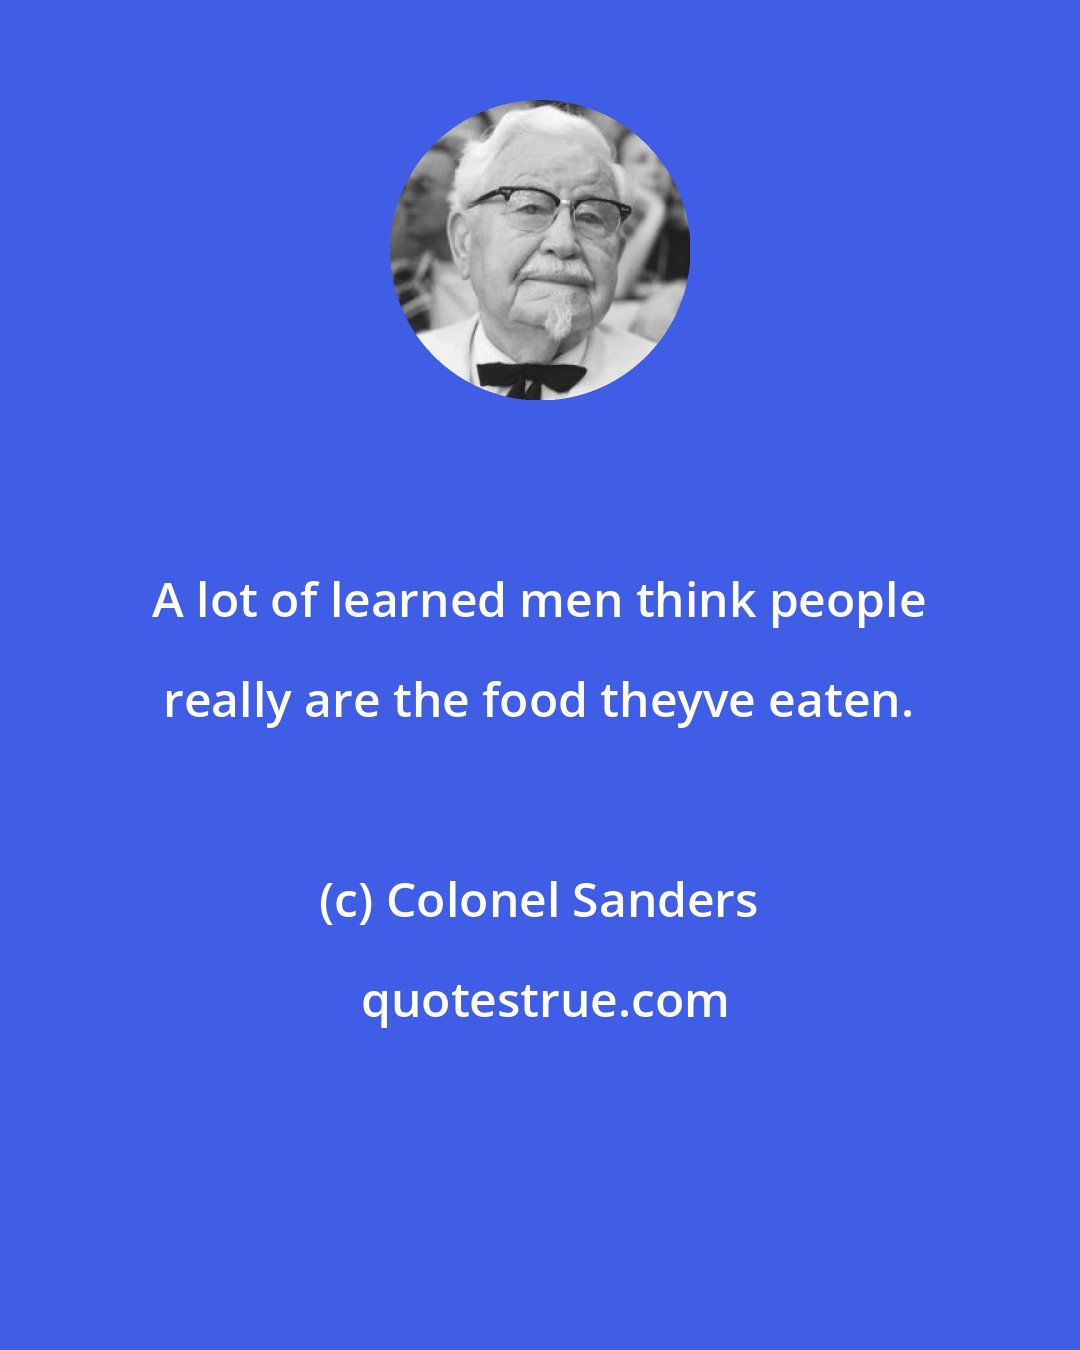 Colonel Sanders: A lot of learned men think people really are the food theyve eaten.